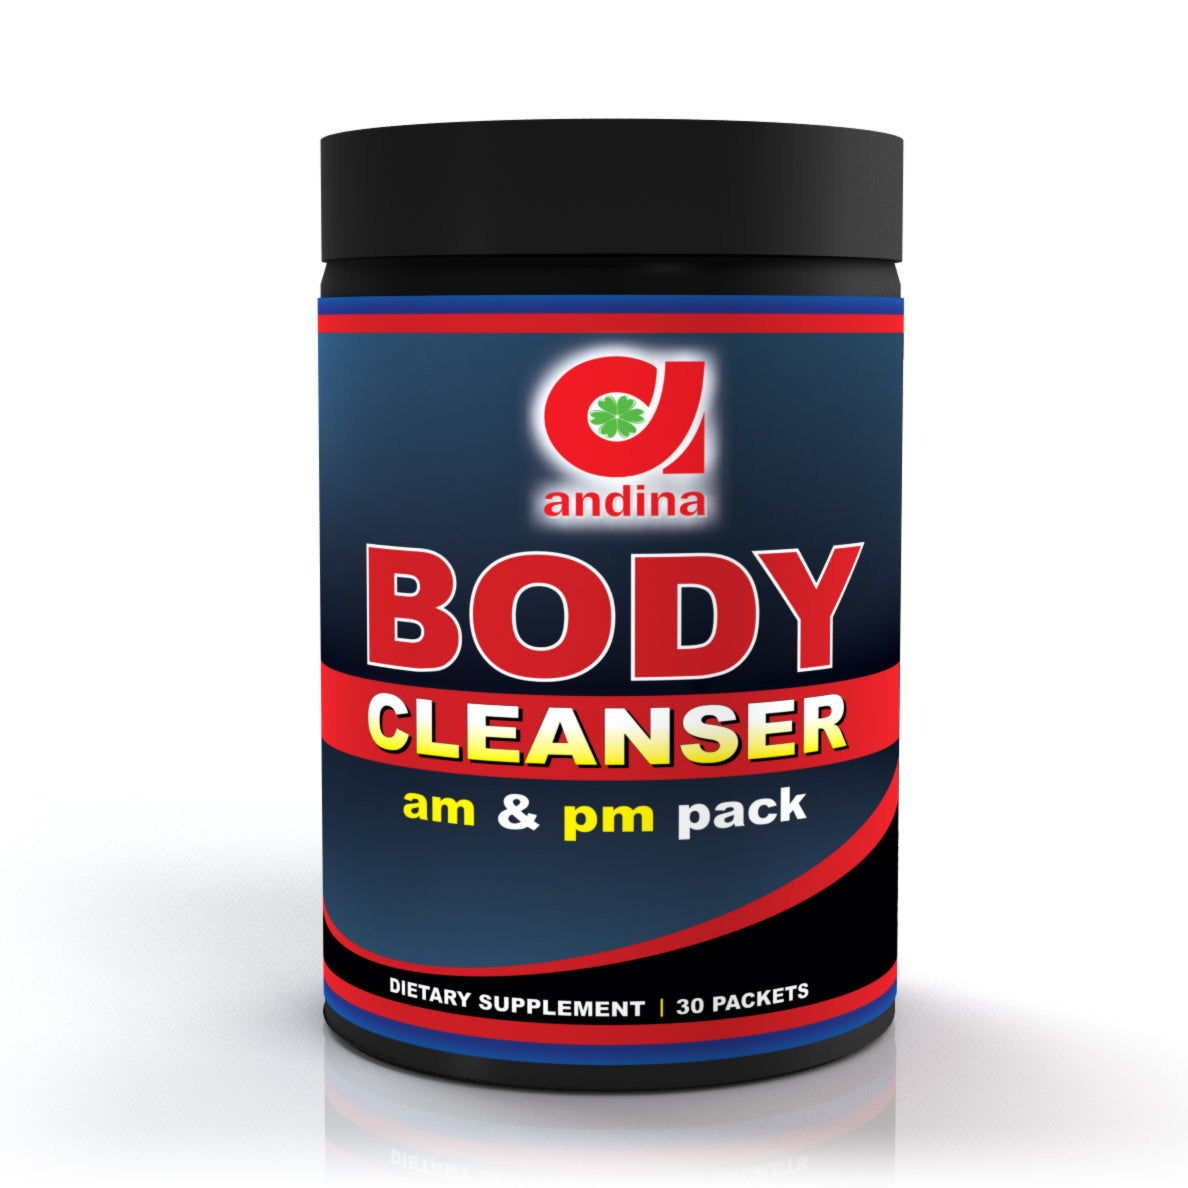 Body Cleanser |30 pack